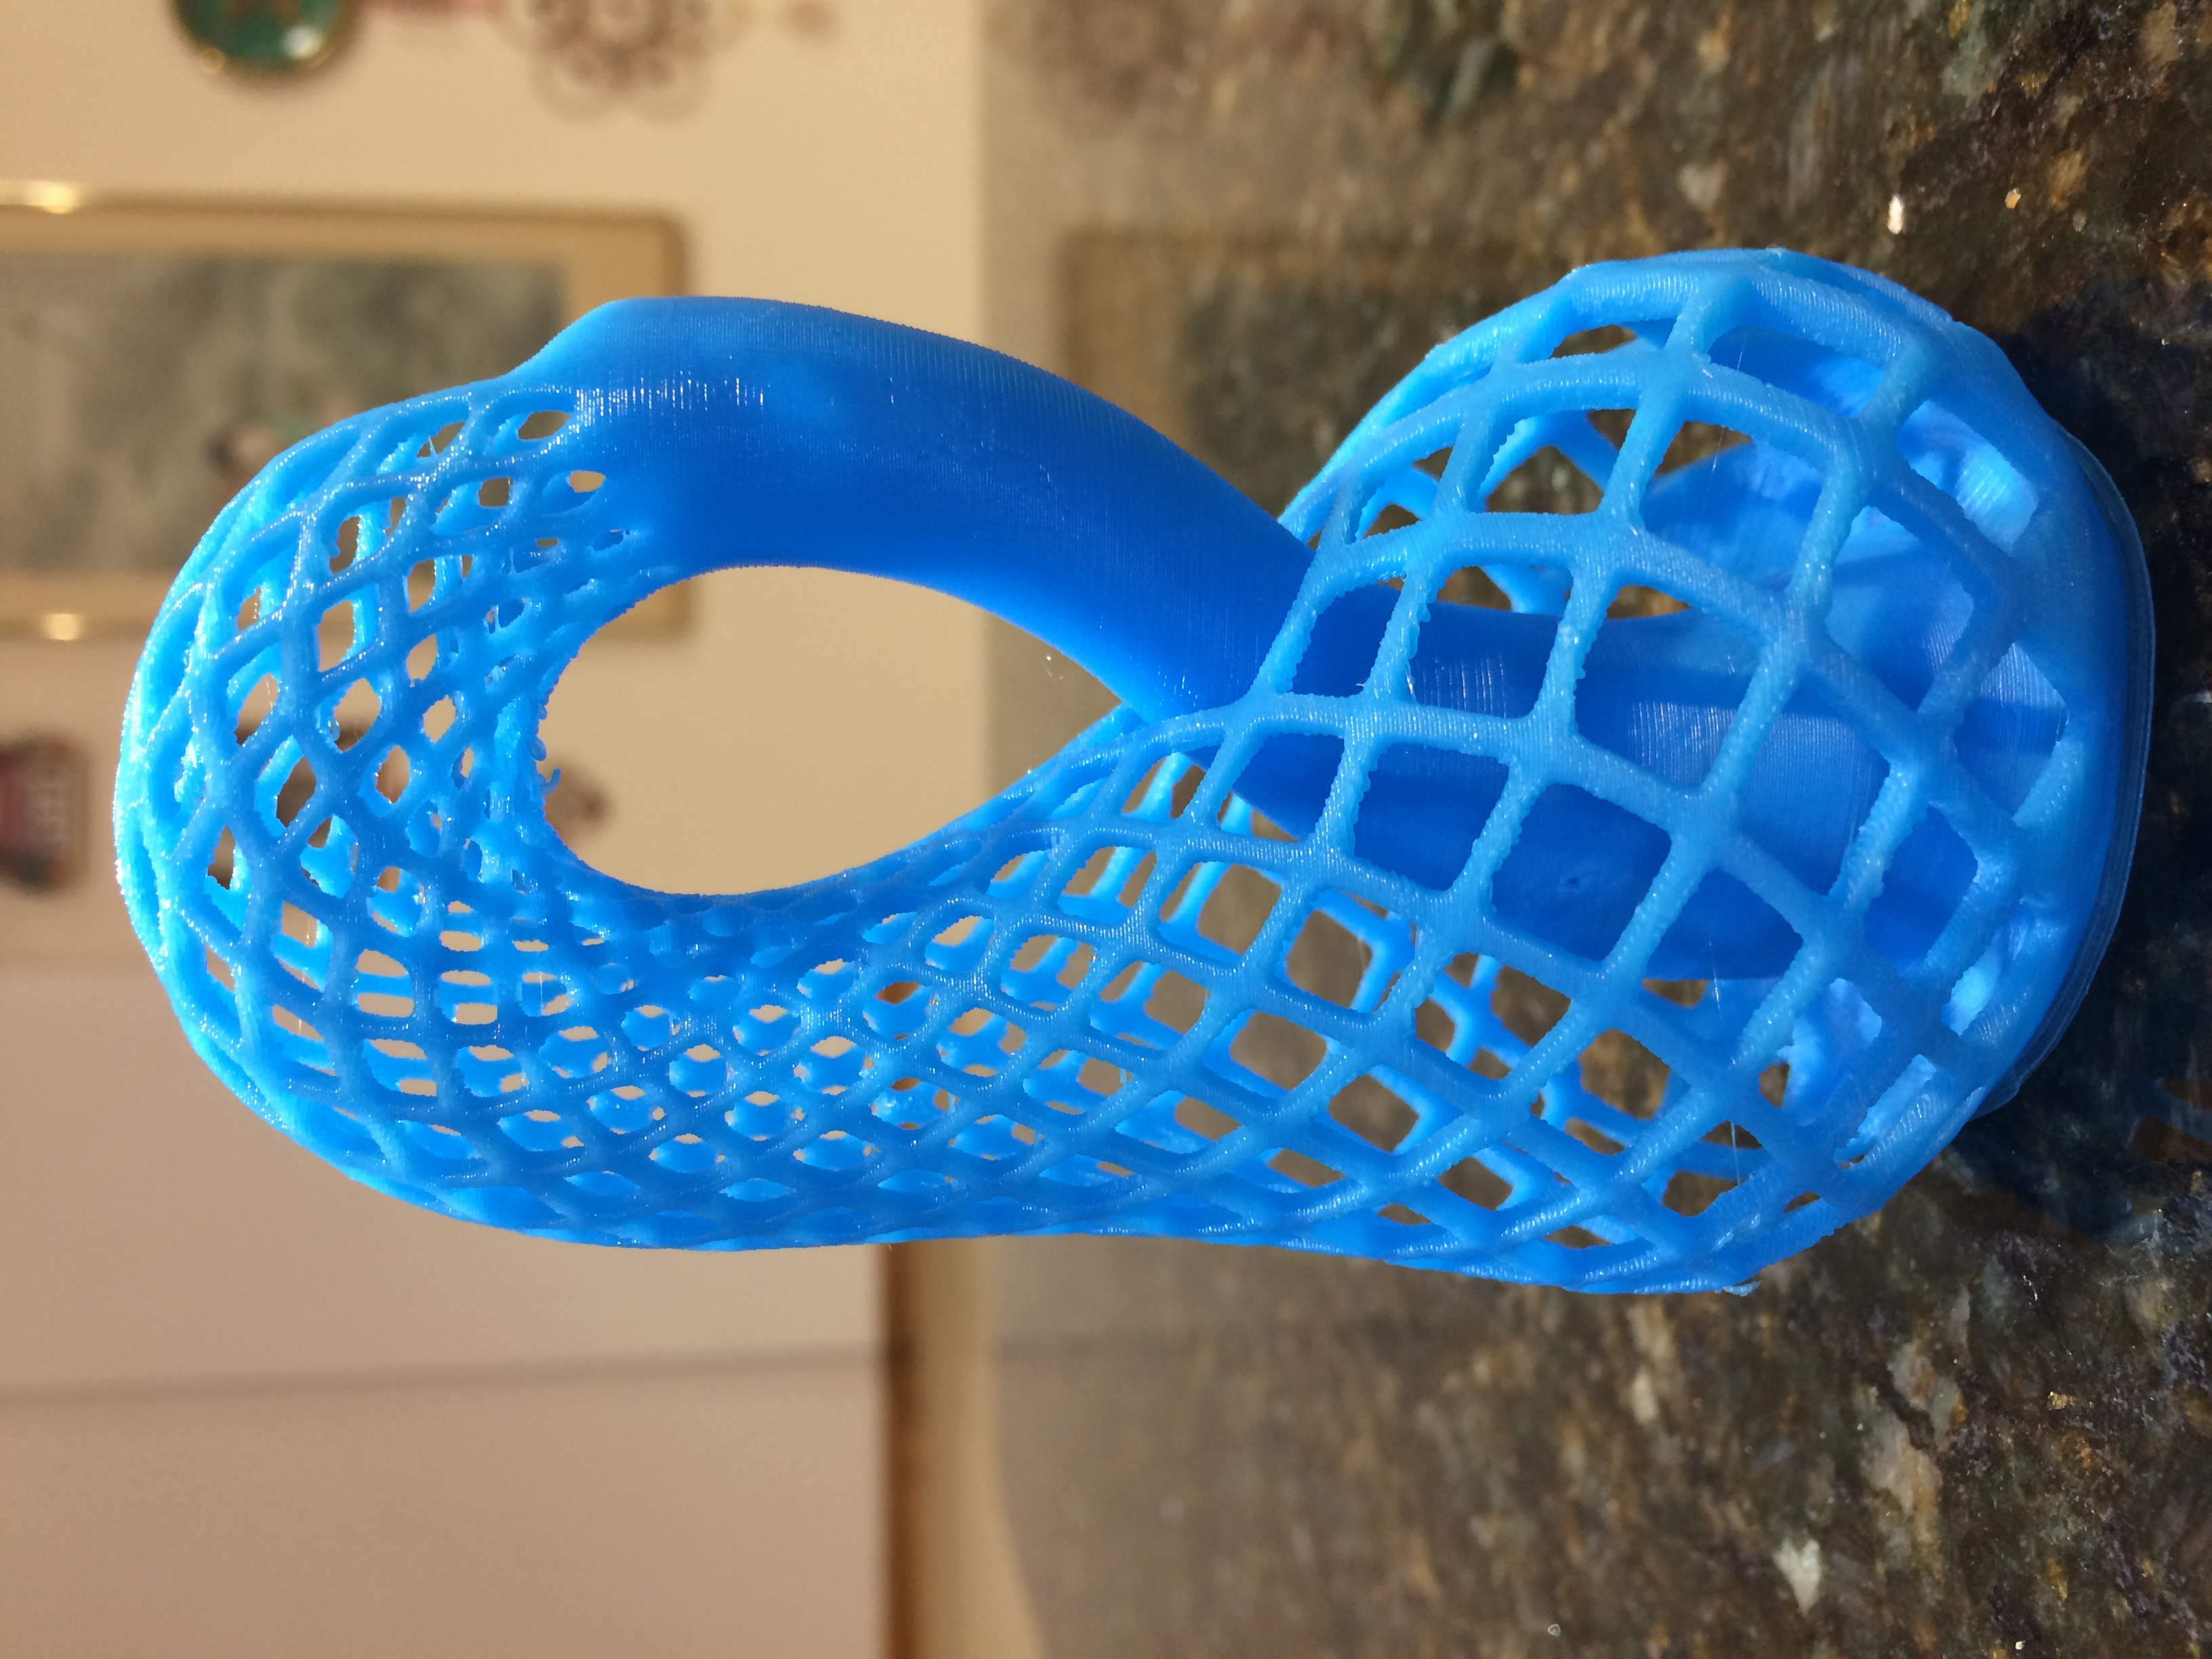 3D Printable Klein Vase Create Cafe 3D Printing Solutions and